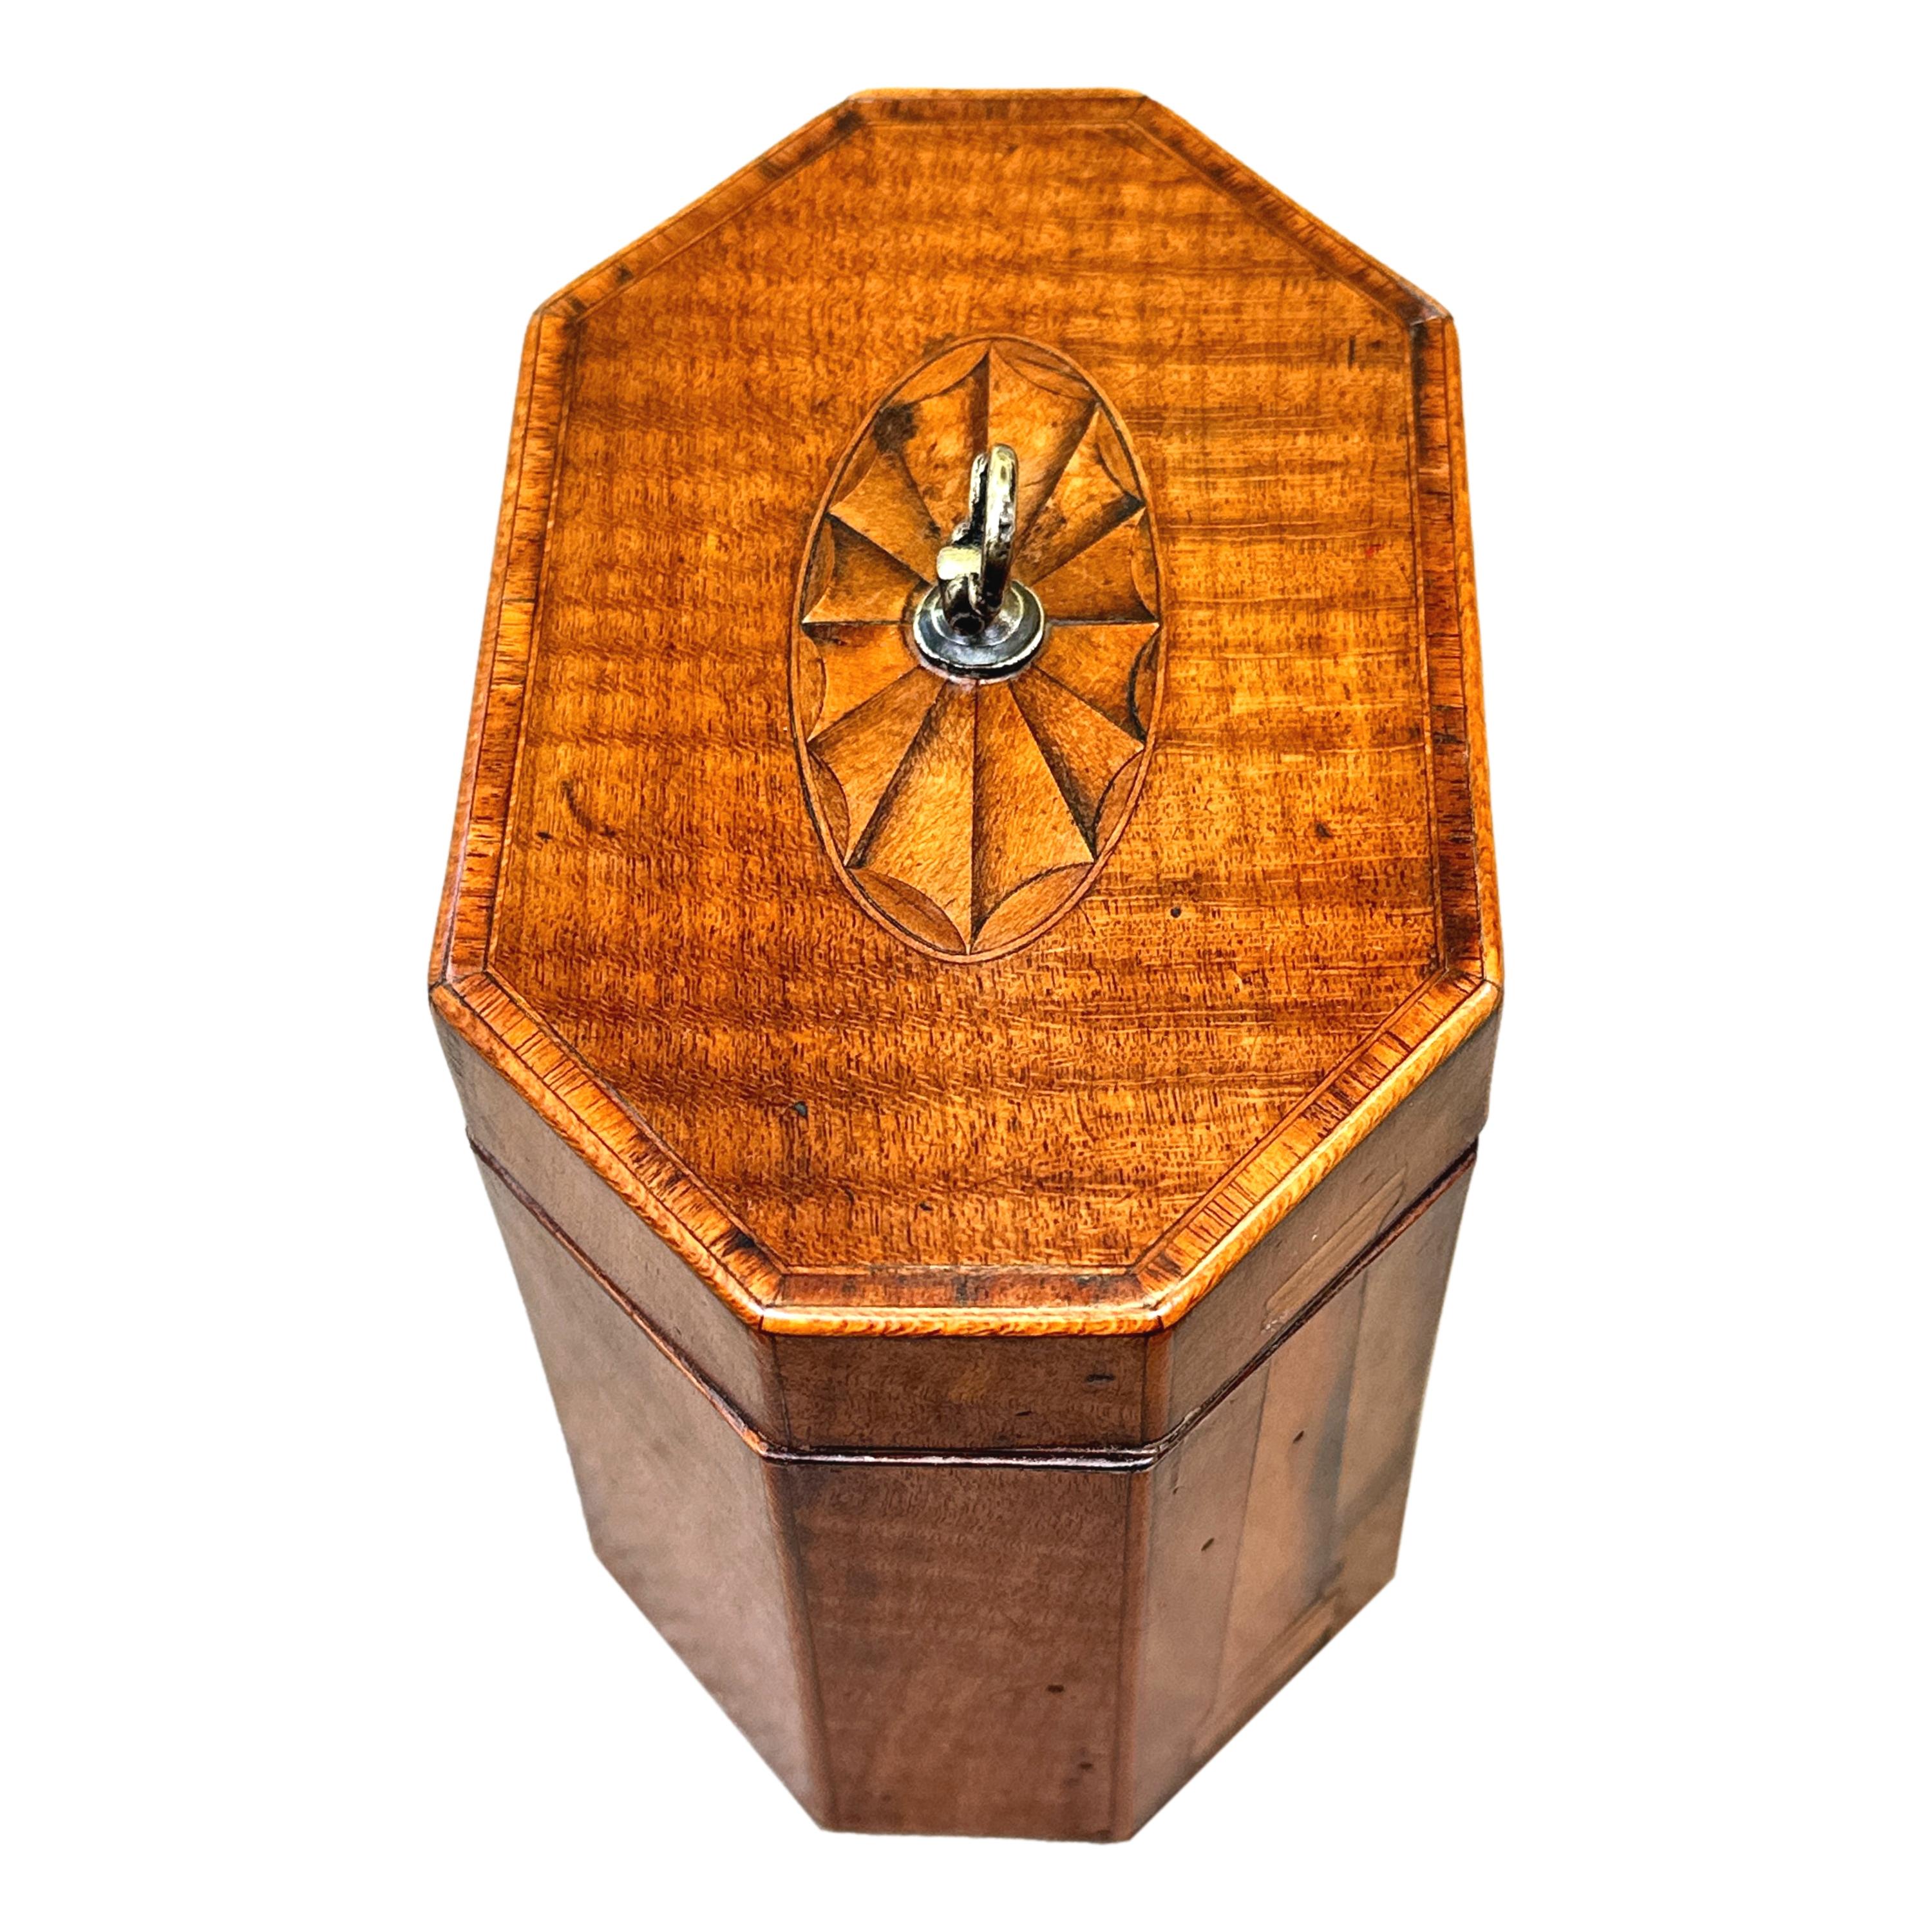 An Very Unusual Late 18th Century George III Period Mahogany Octagonal Tea Caddy, Having Rare Attractive Inlaid Decoration Of Fans And Pillars, With Hinged Lid Enclosing Lidded Compartment.

Tea was an extremely precious commodity throughout the